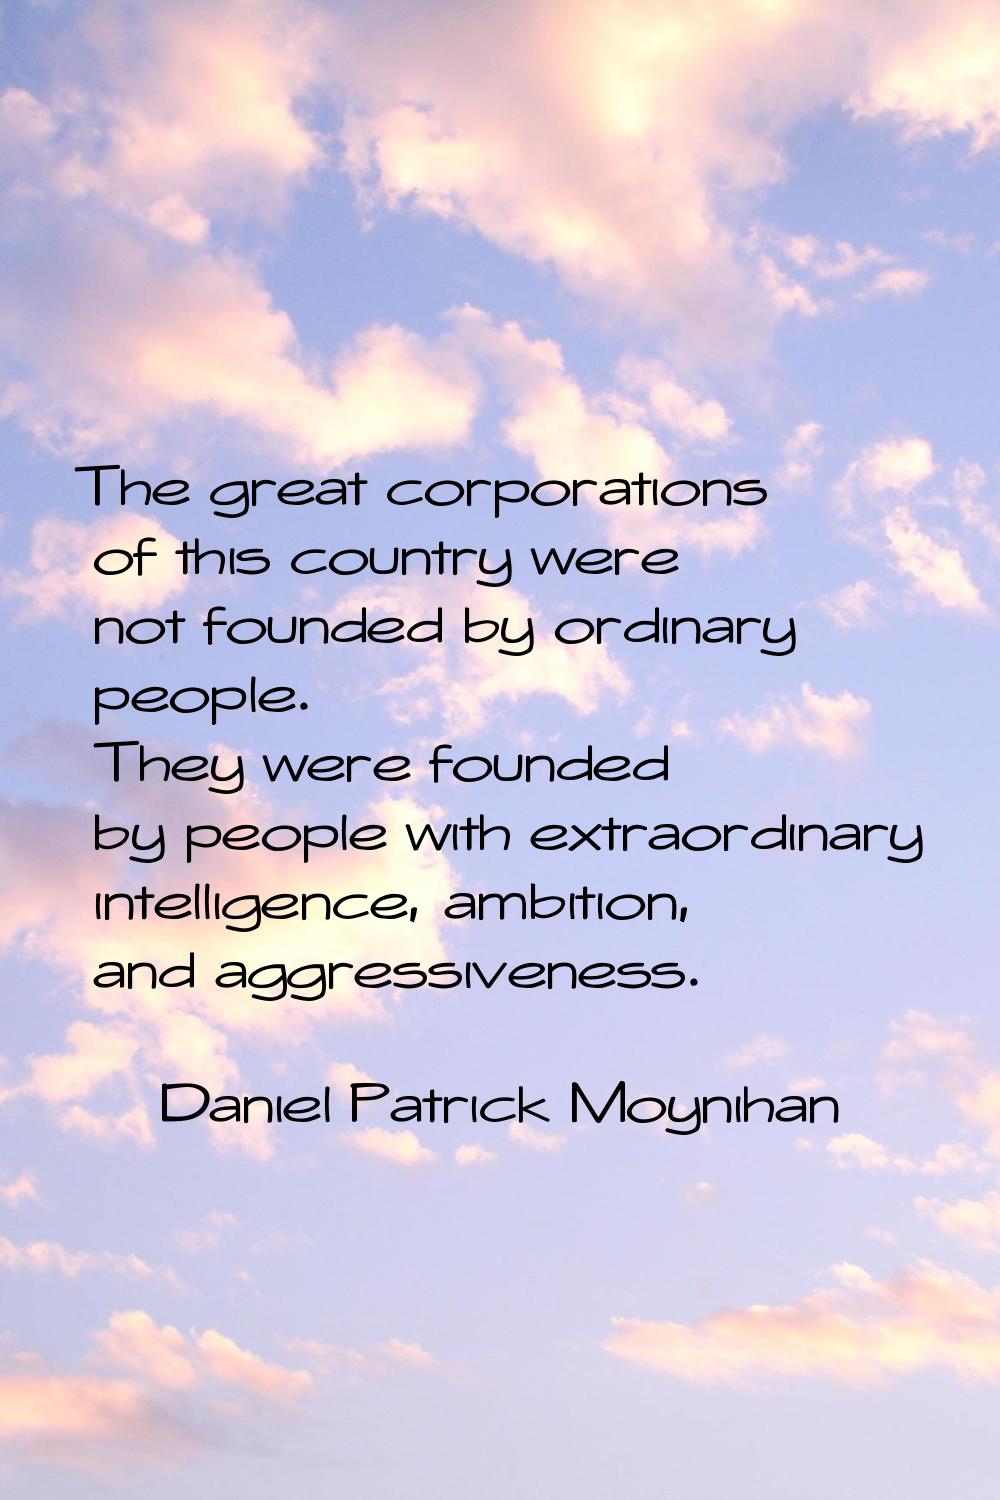 The great corporations of this country were not founded by ordinary people. They were founded by pe